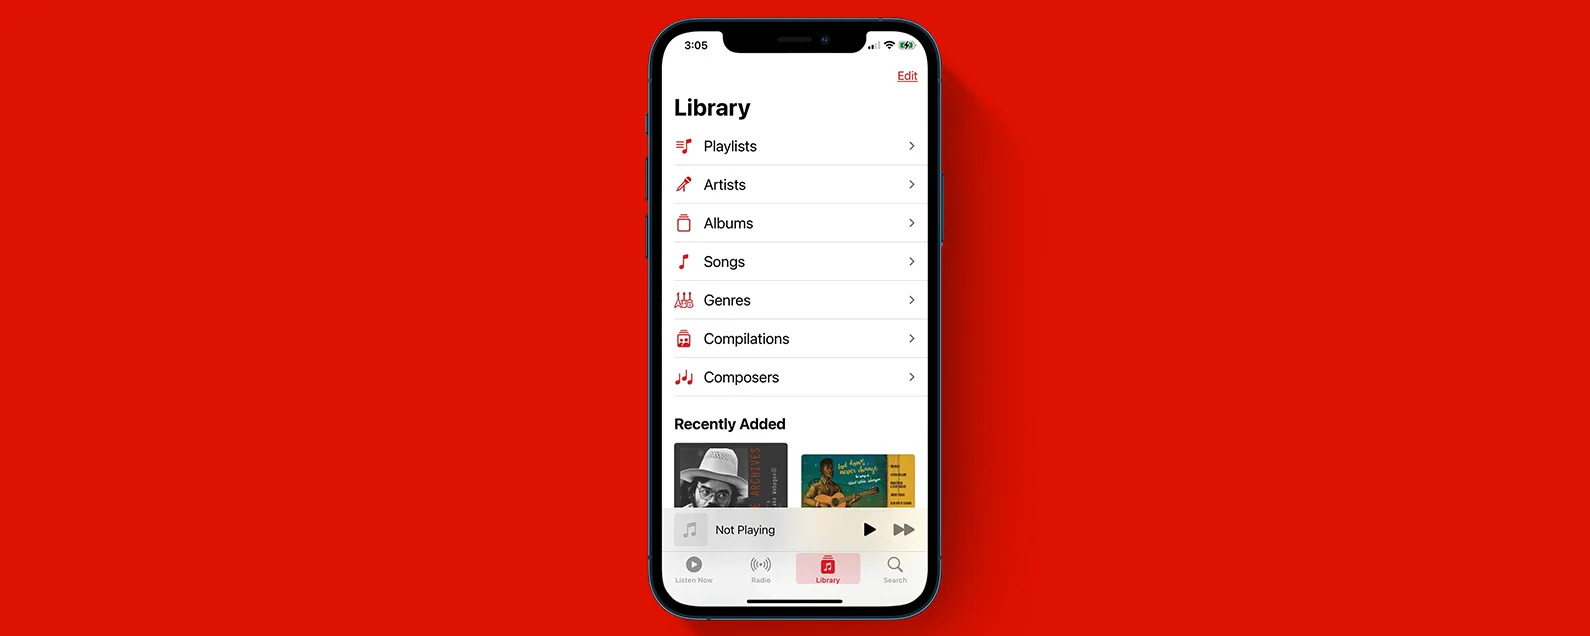 How To Download All Songs At Once On Apple Music